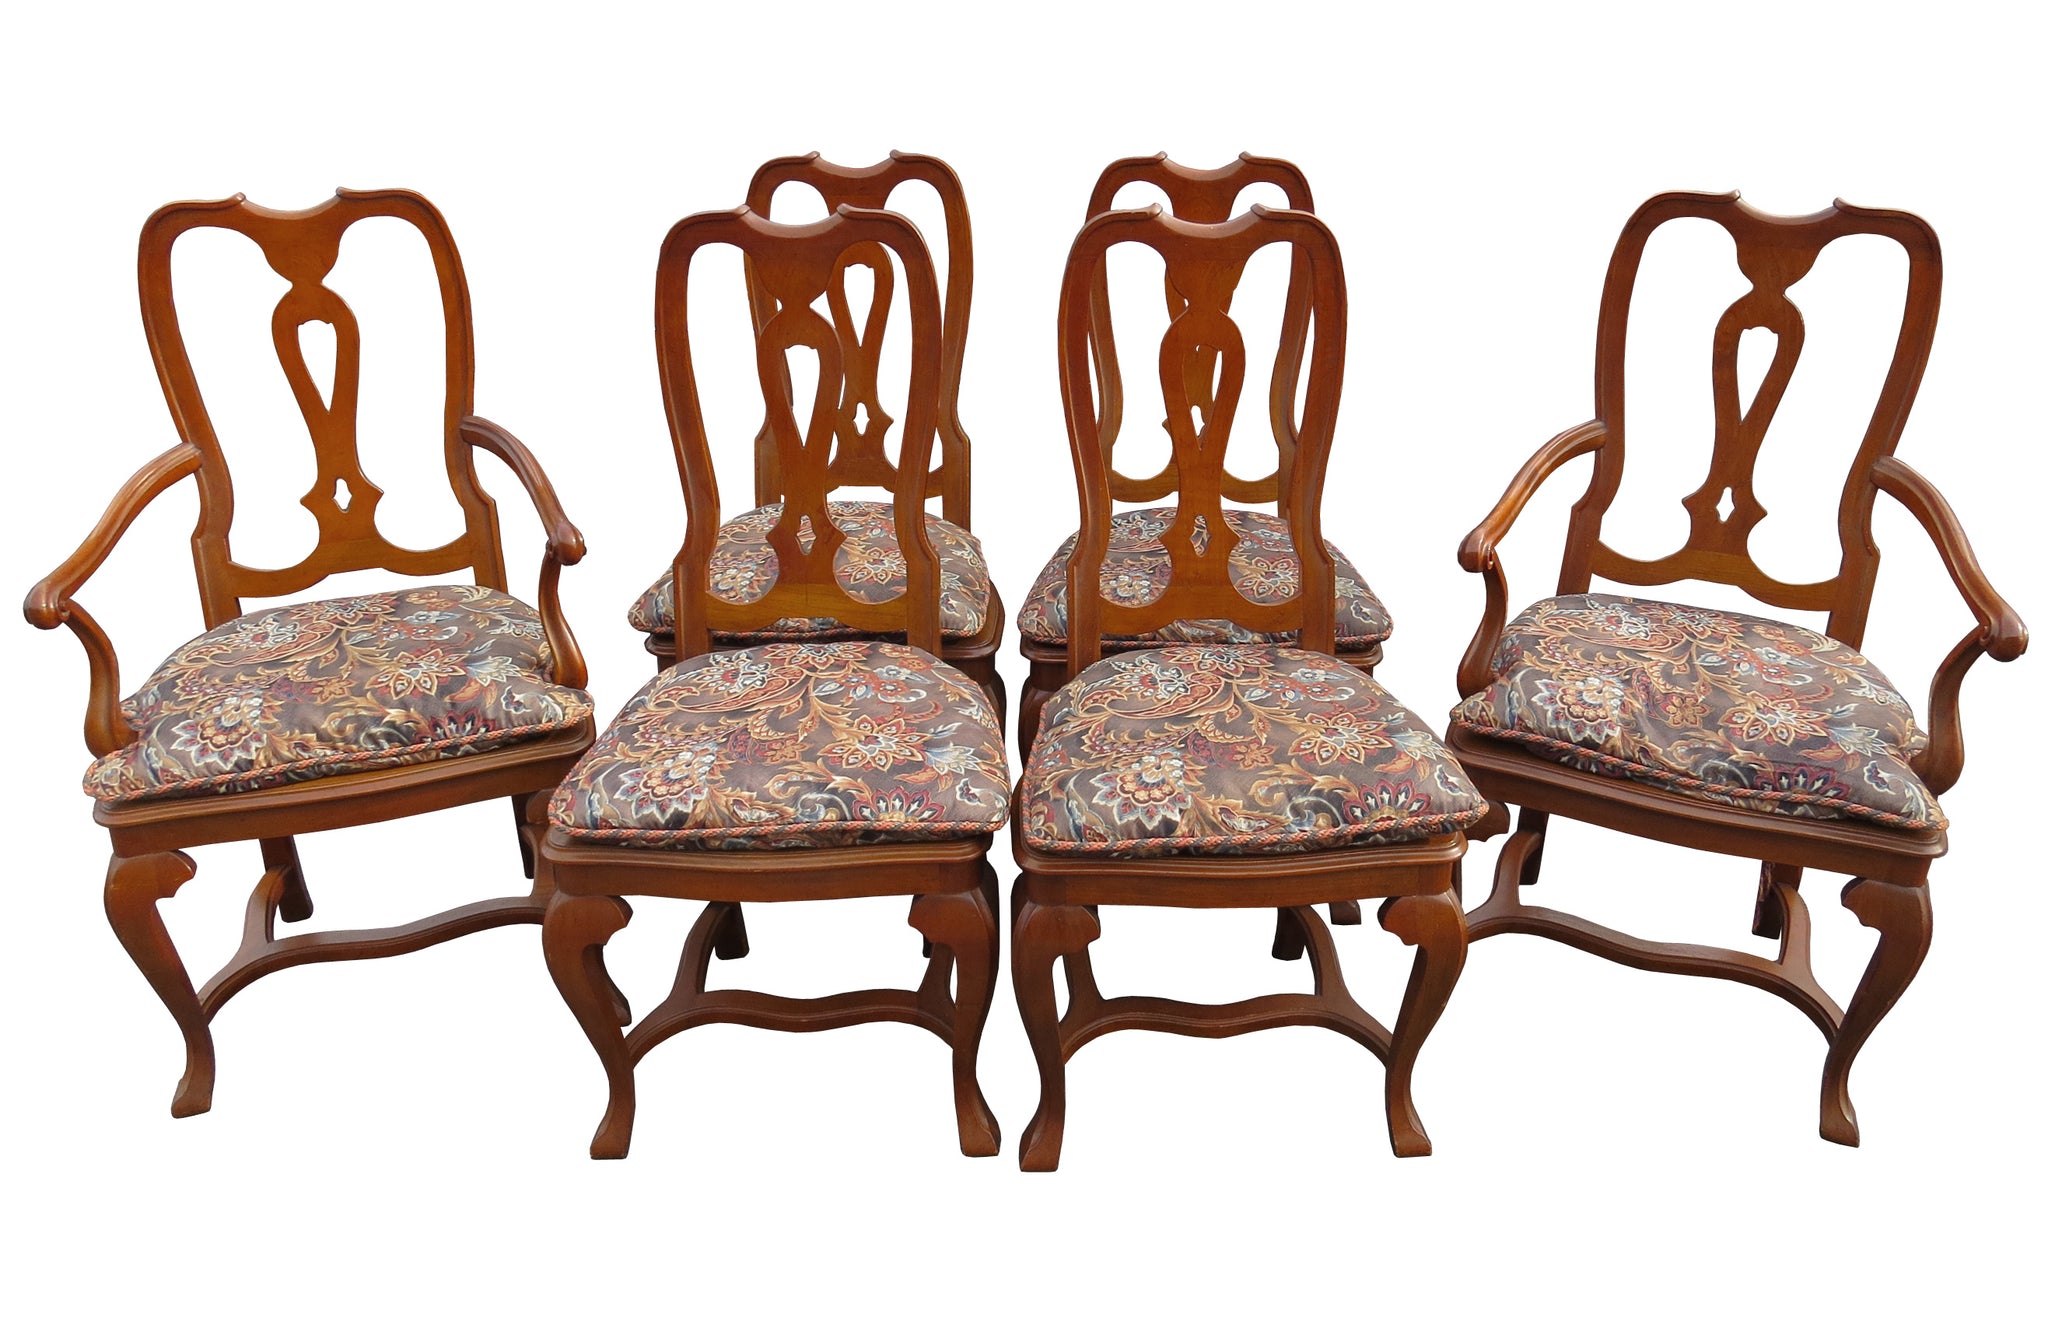 edgebrookhouse - Vintage Baker Furniture Co English Queen Anne Inspired Dining Chairs - Set of 6